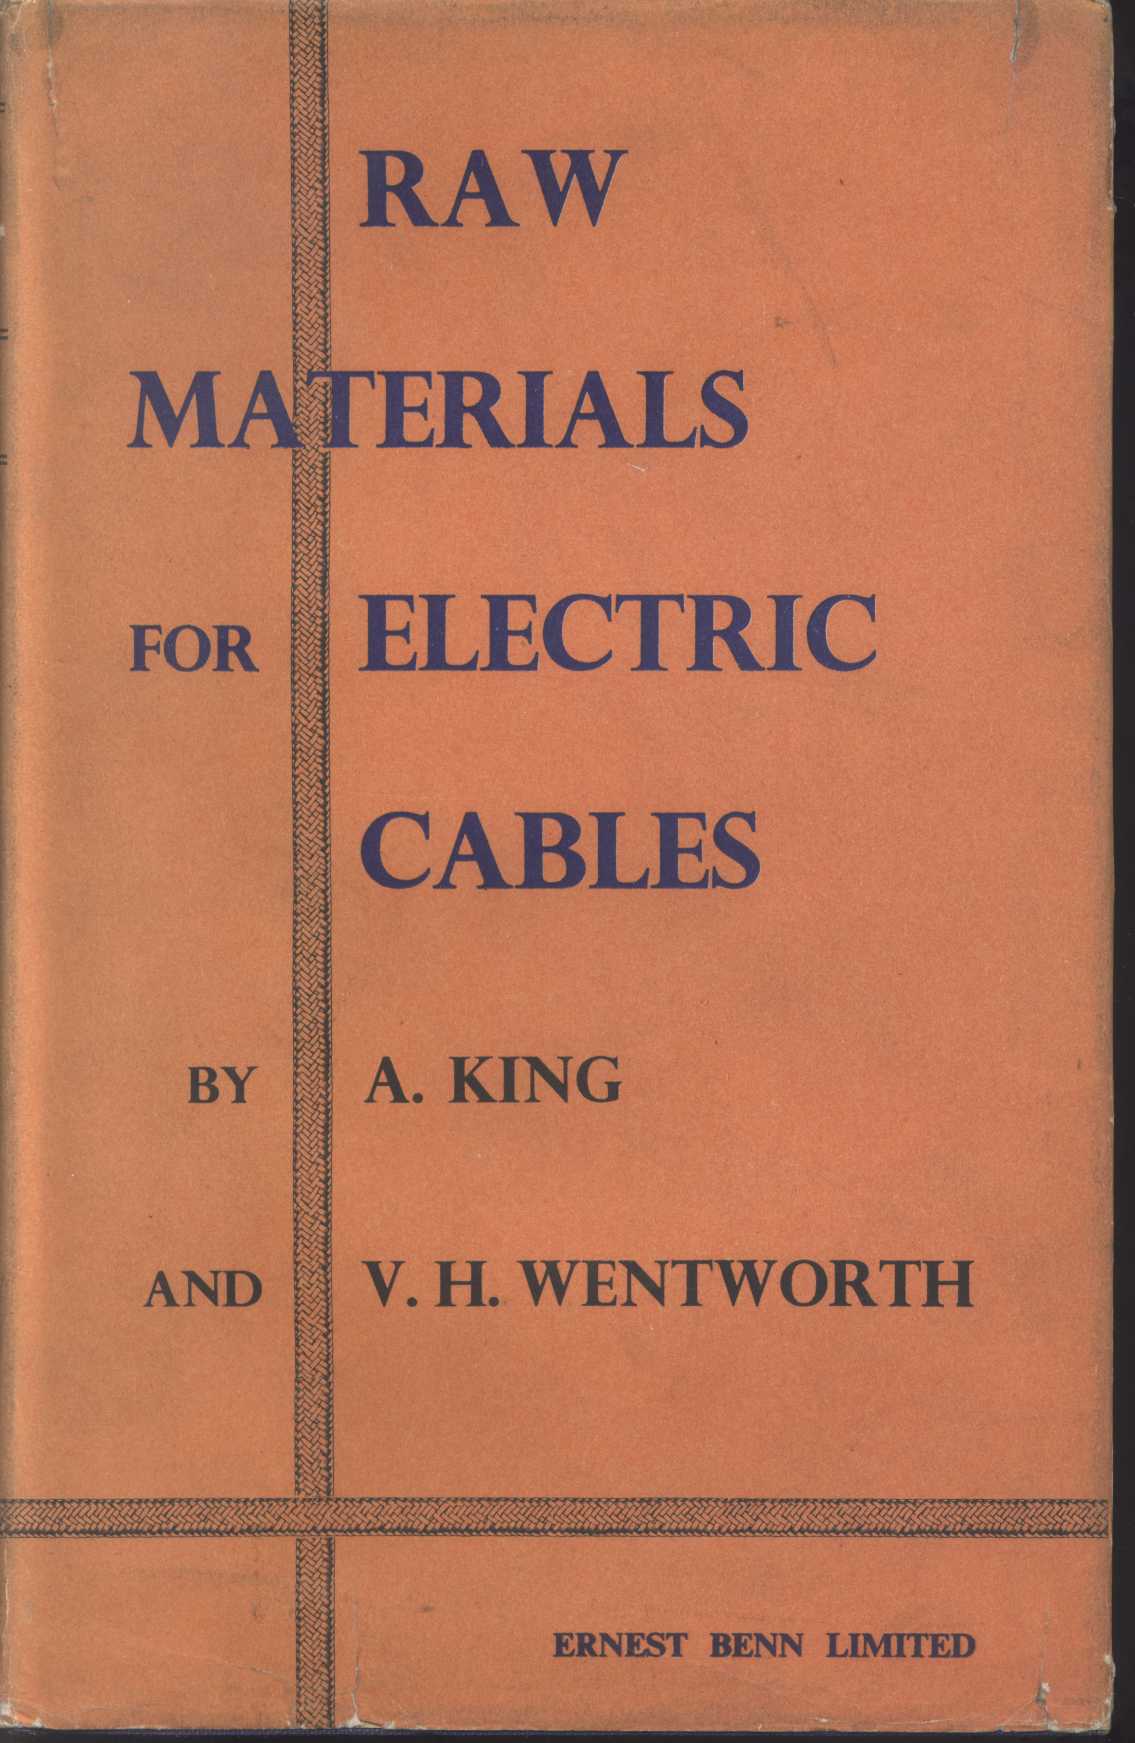 Raw Materials for Electric Cables